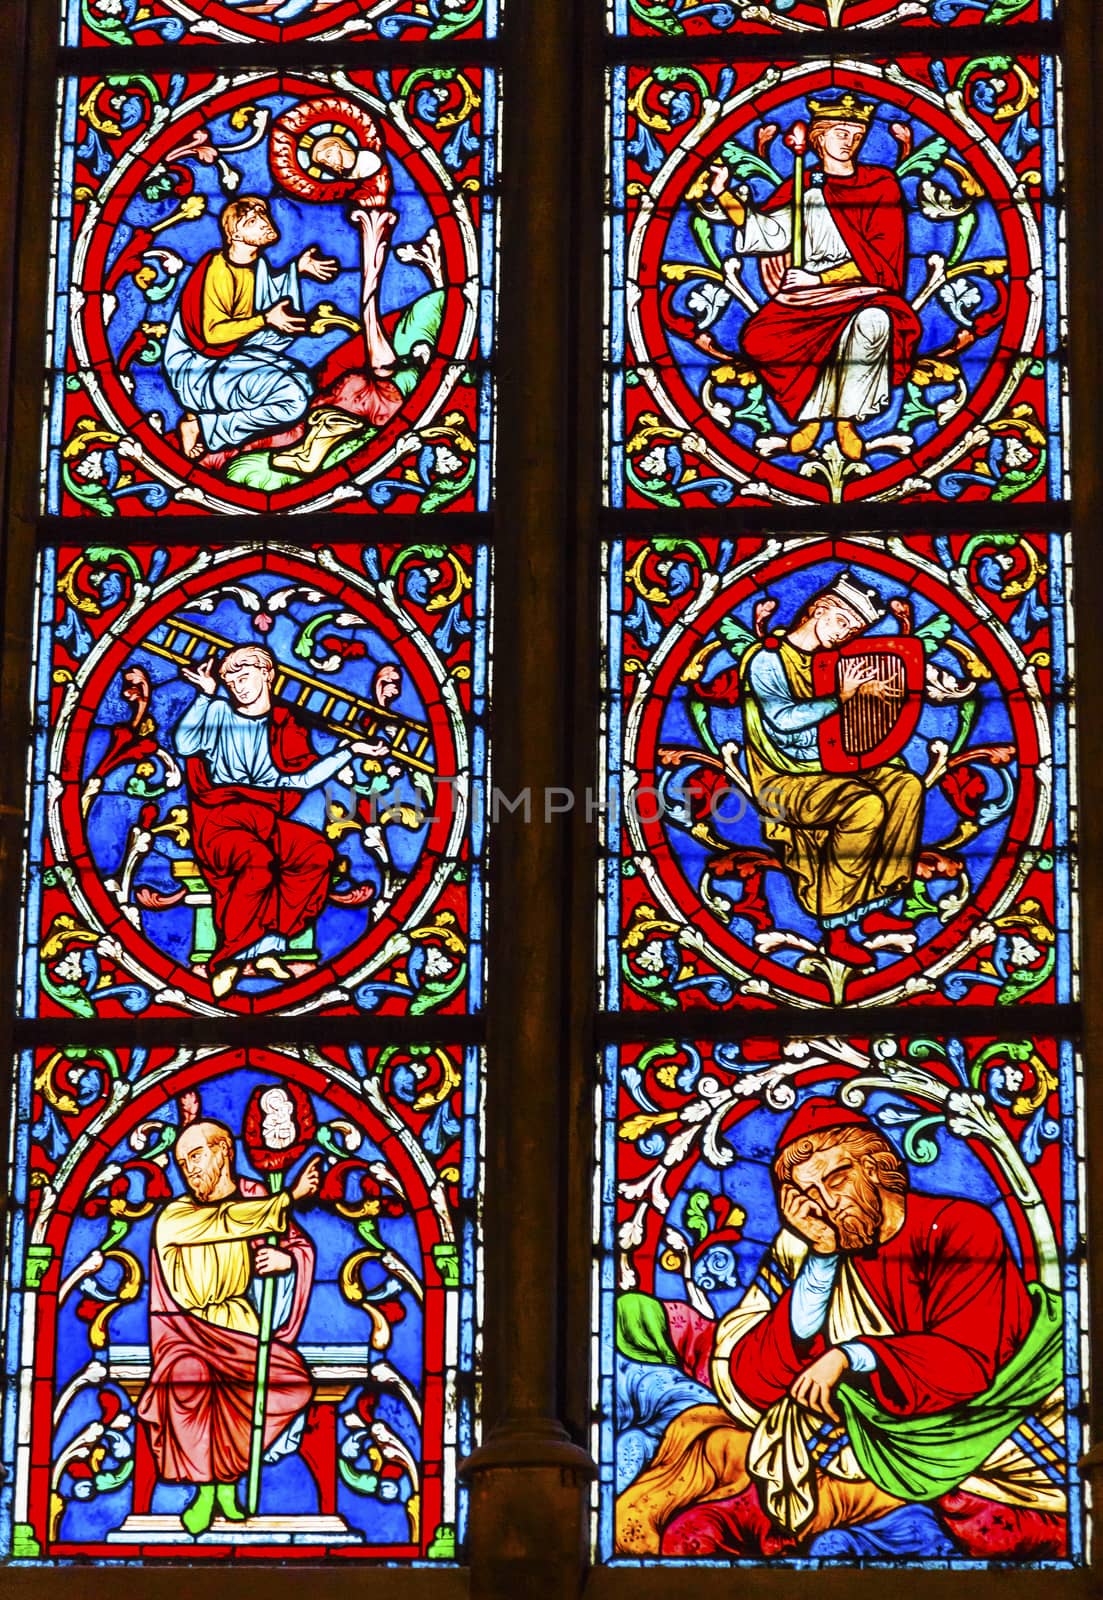 Many Kings Medieval Stories Stained Glass Notre Dame Cathedral Paris France.  Notre Dame was built between 1163 and 1250AD.  